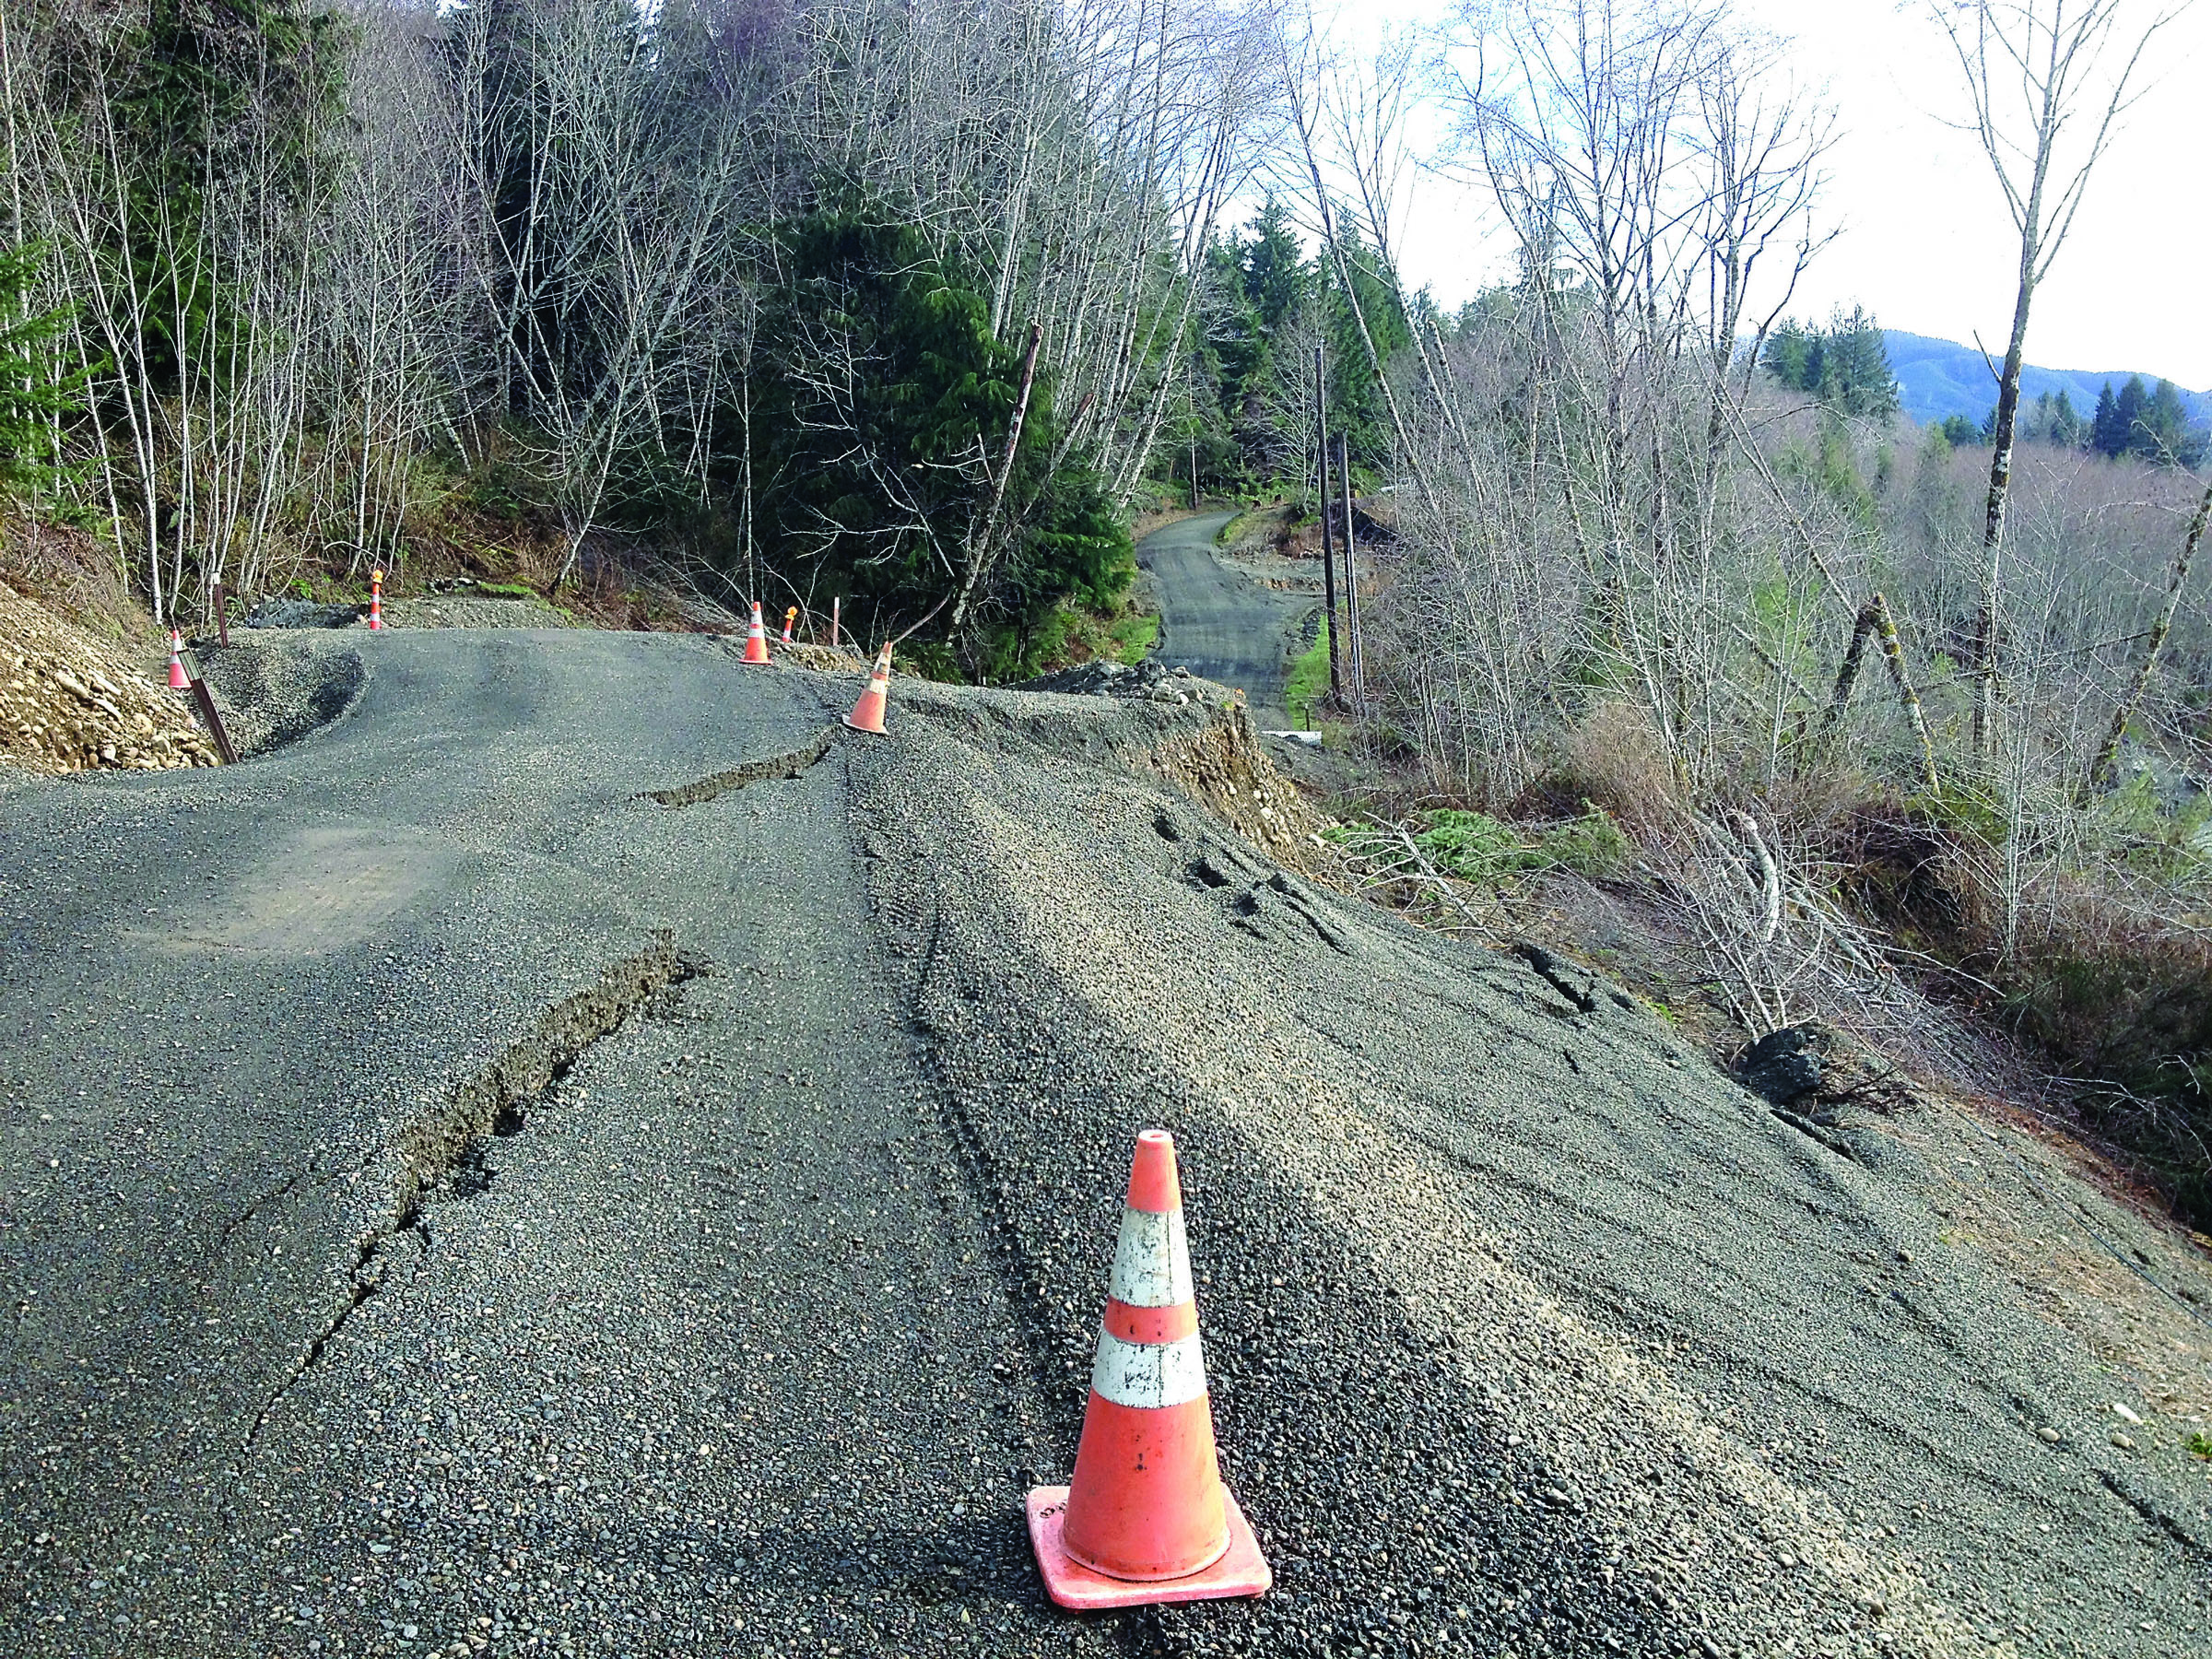 Jefferson County officials have committed $1.1 million to reroute a stretch of Undie Road that has been severely damaged. (Monte Reinders)